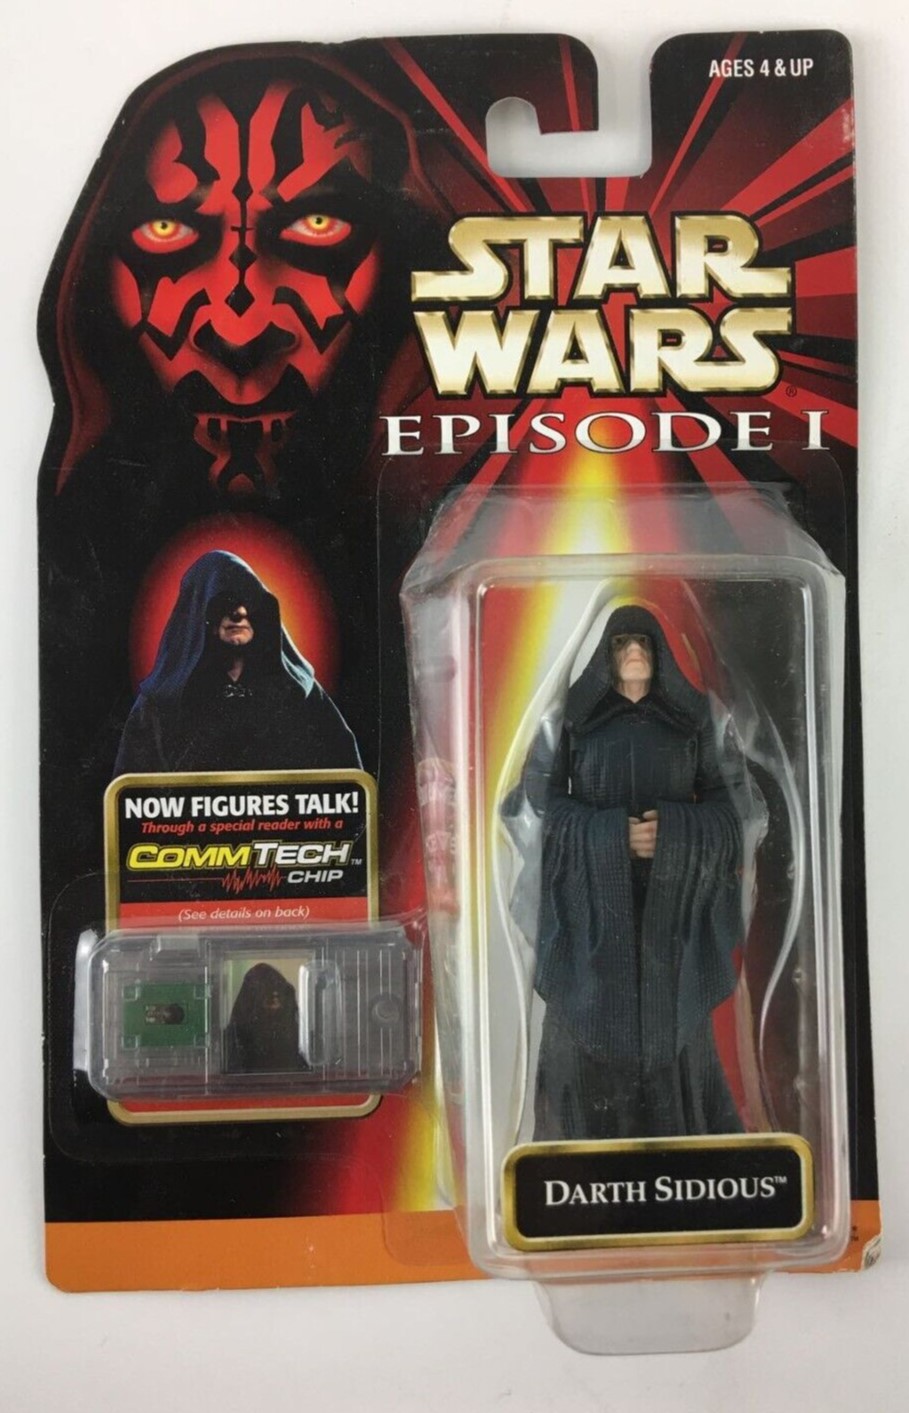 Star Wars Episode 1 Commtech Darth Sidious